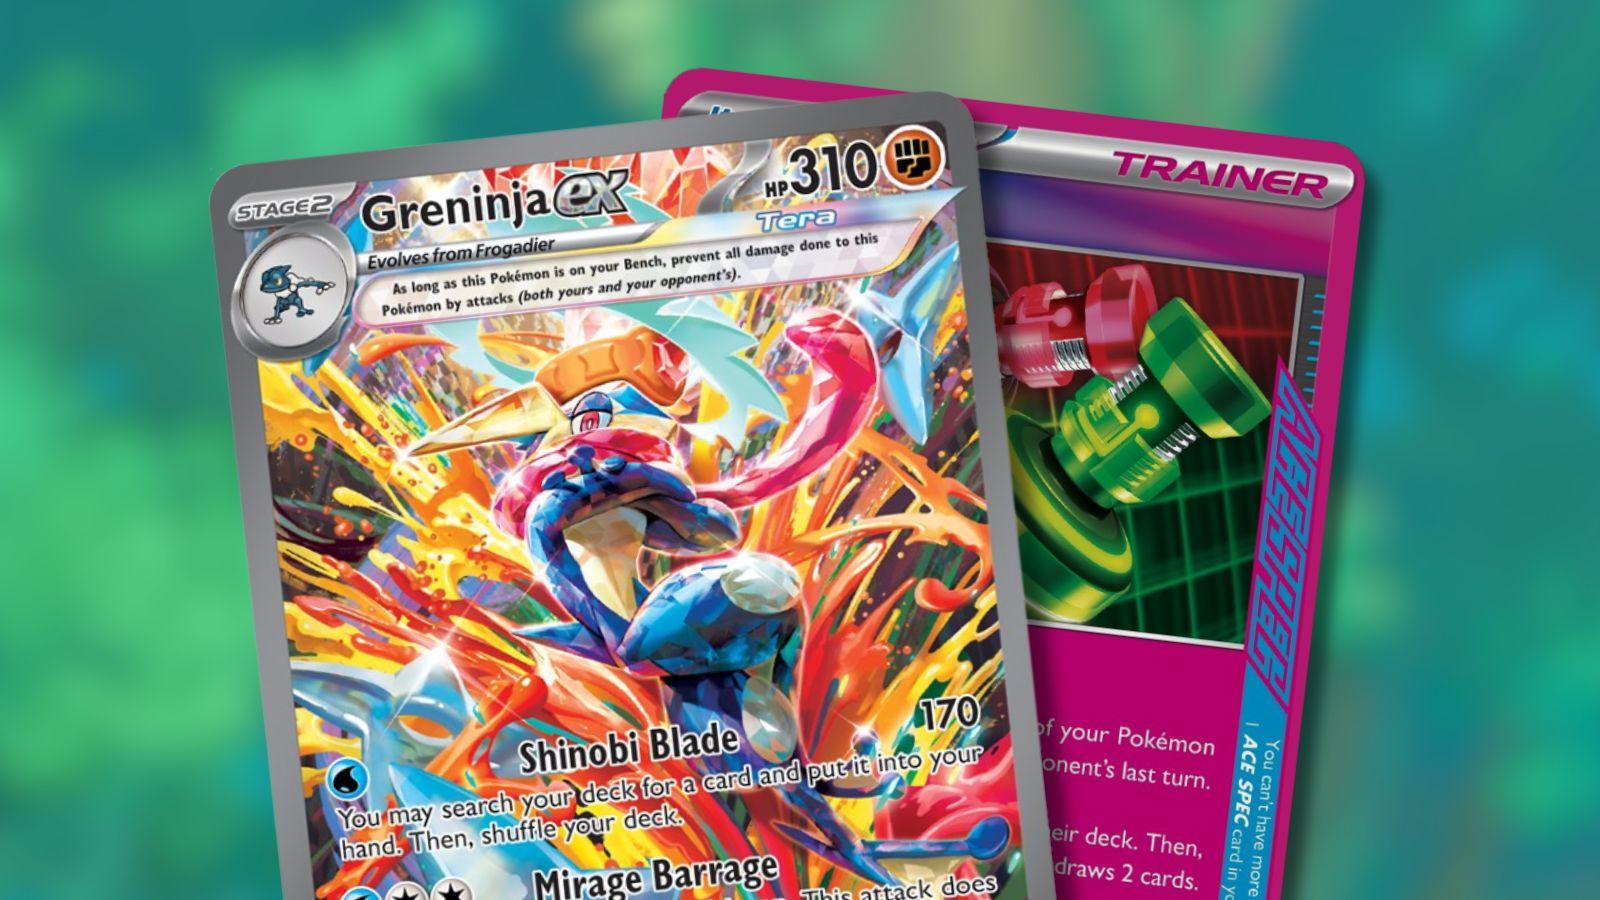 Greninja and ACE SPEC card with Pokemon anime background.